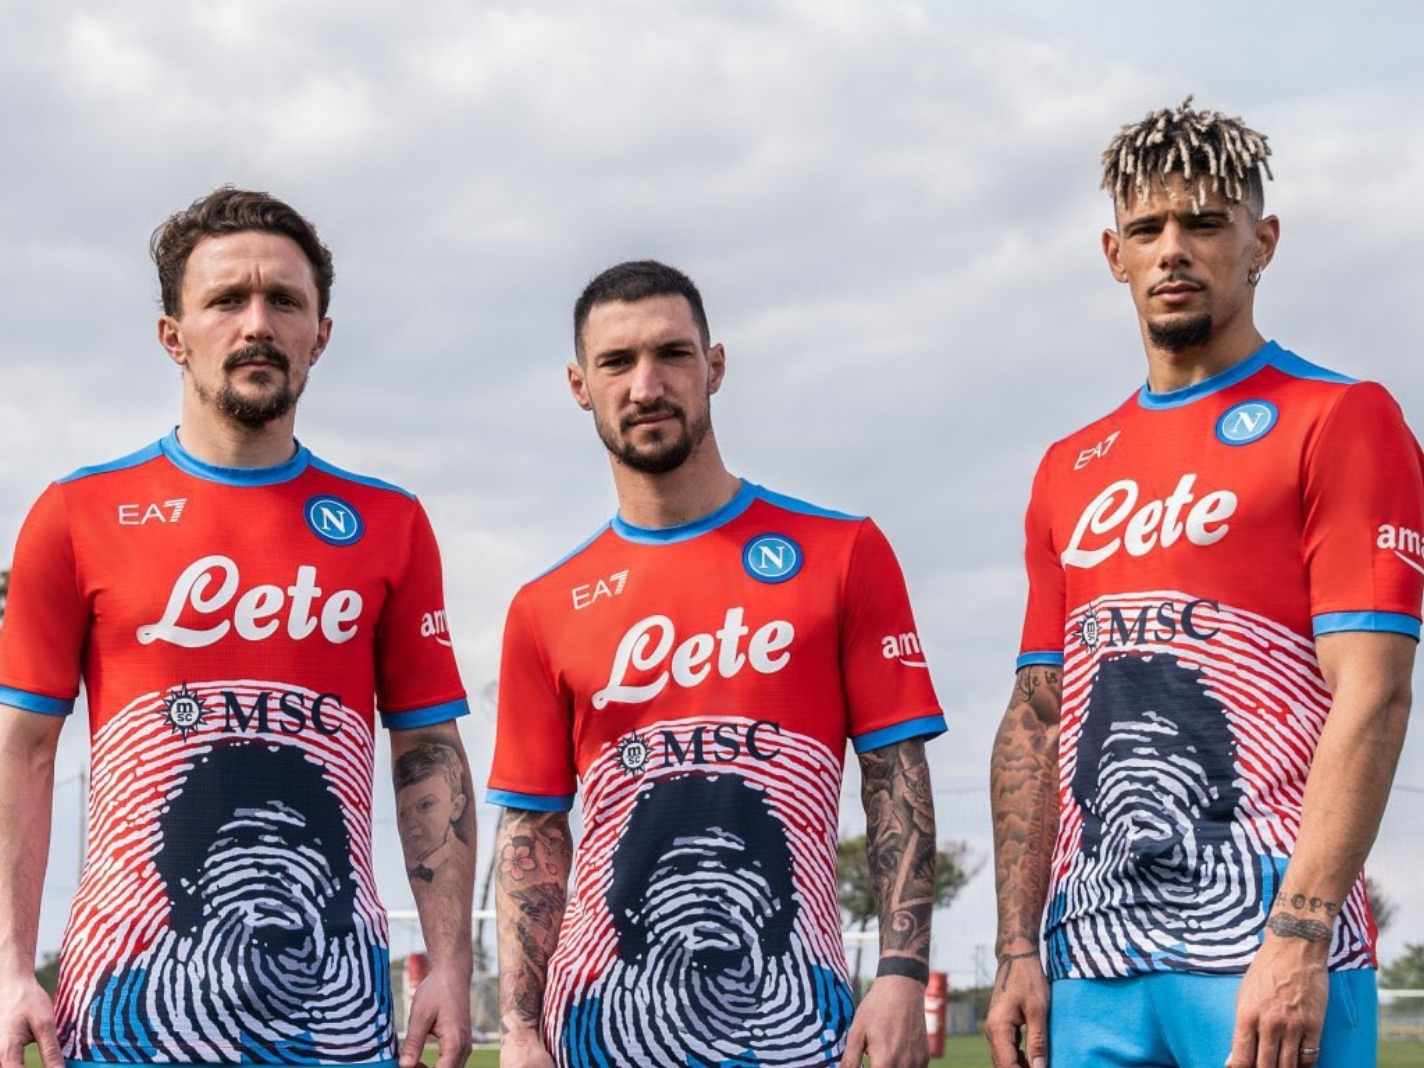 Napoli have released their thirteenth kit of the season